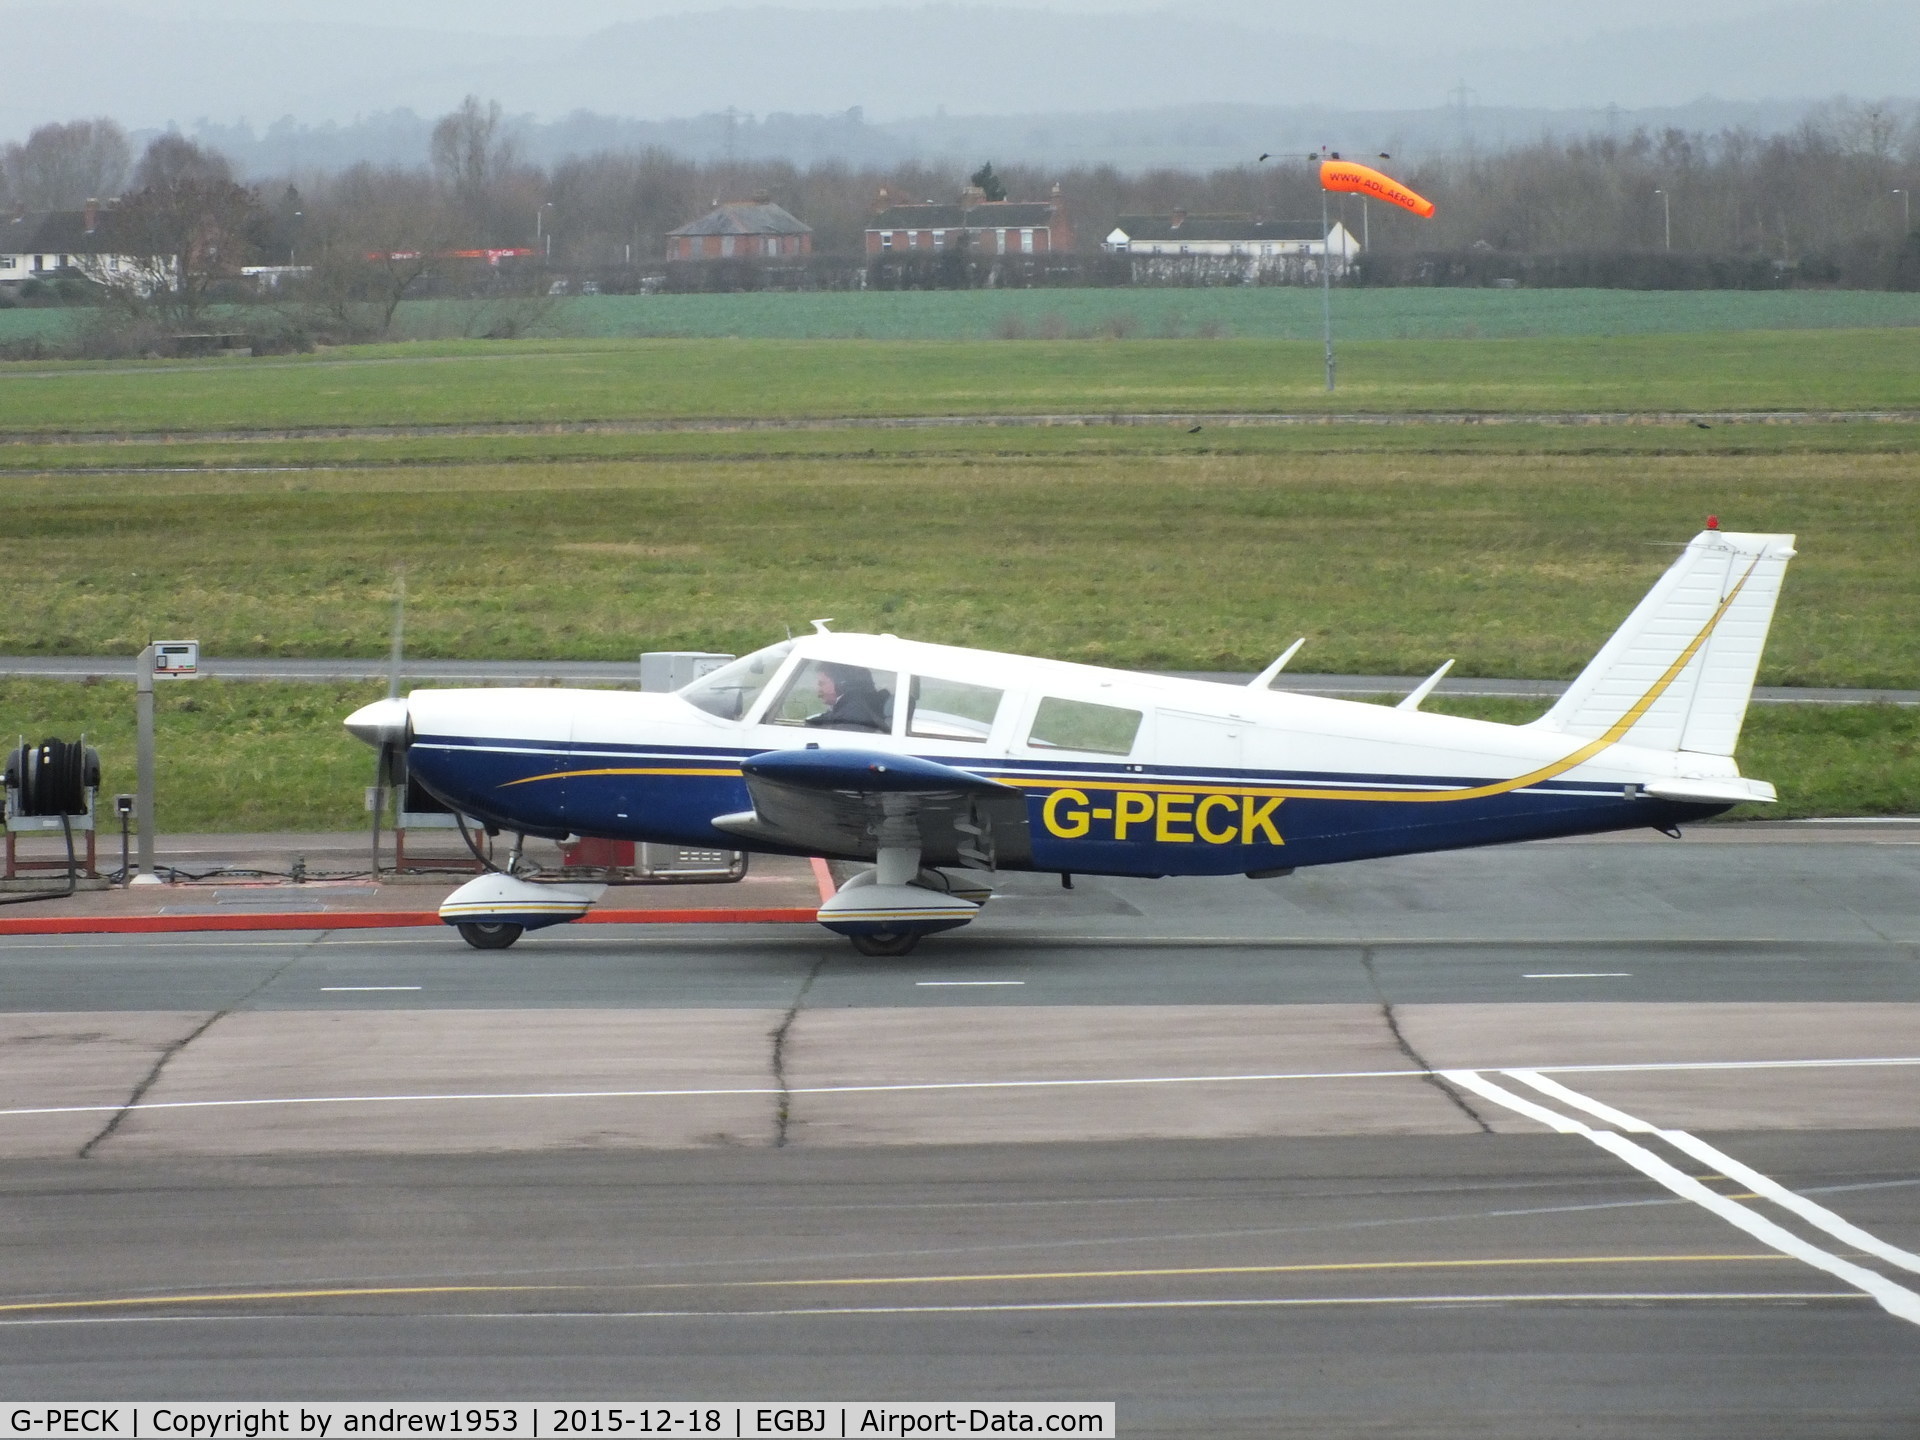 G-PECK, 1970 Piper PA-32-300 Cherokee Six C/N 32-7140008, G-PECK at Gloucestershire Airport.